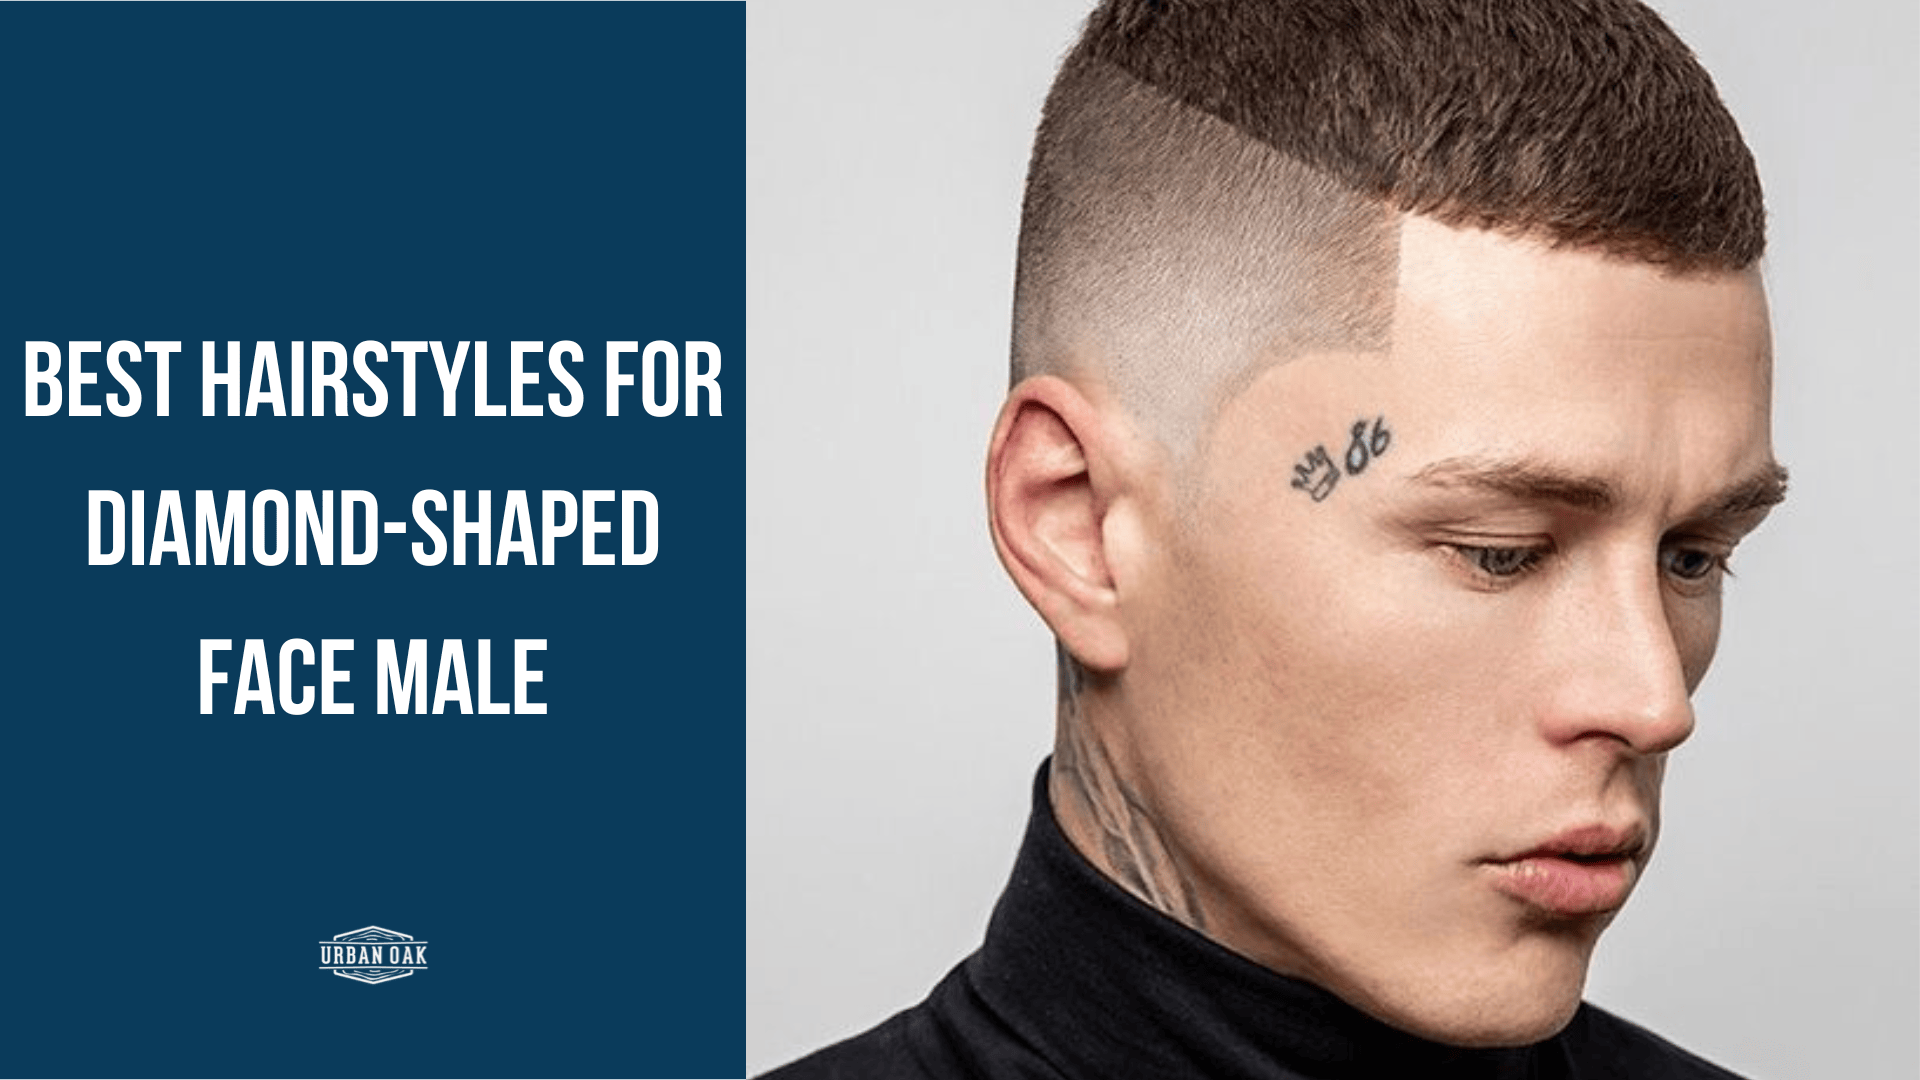 Best Hairstyles for Diamond-Shaped Face Male